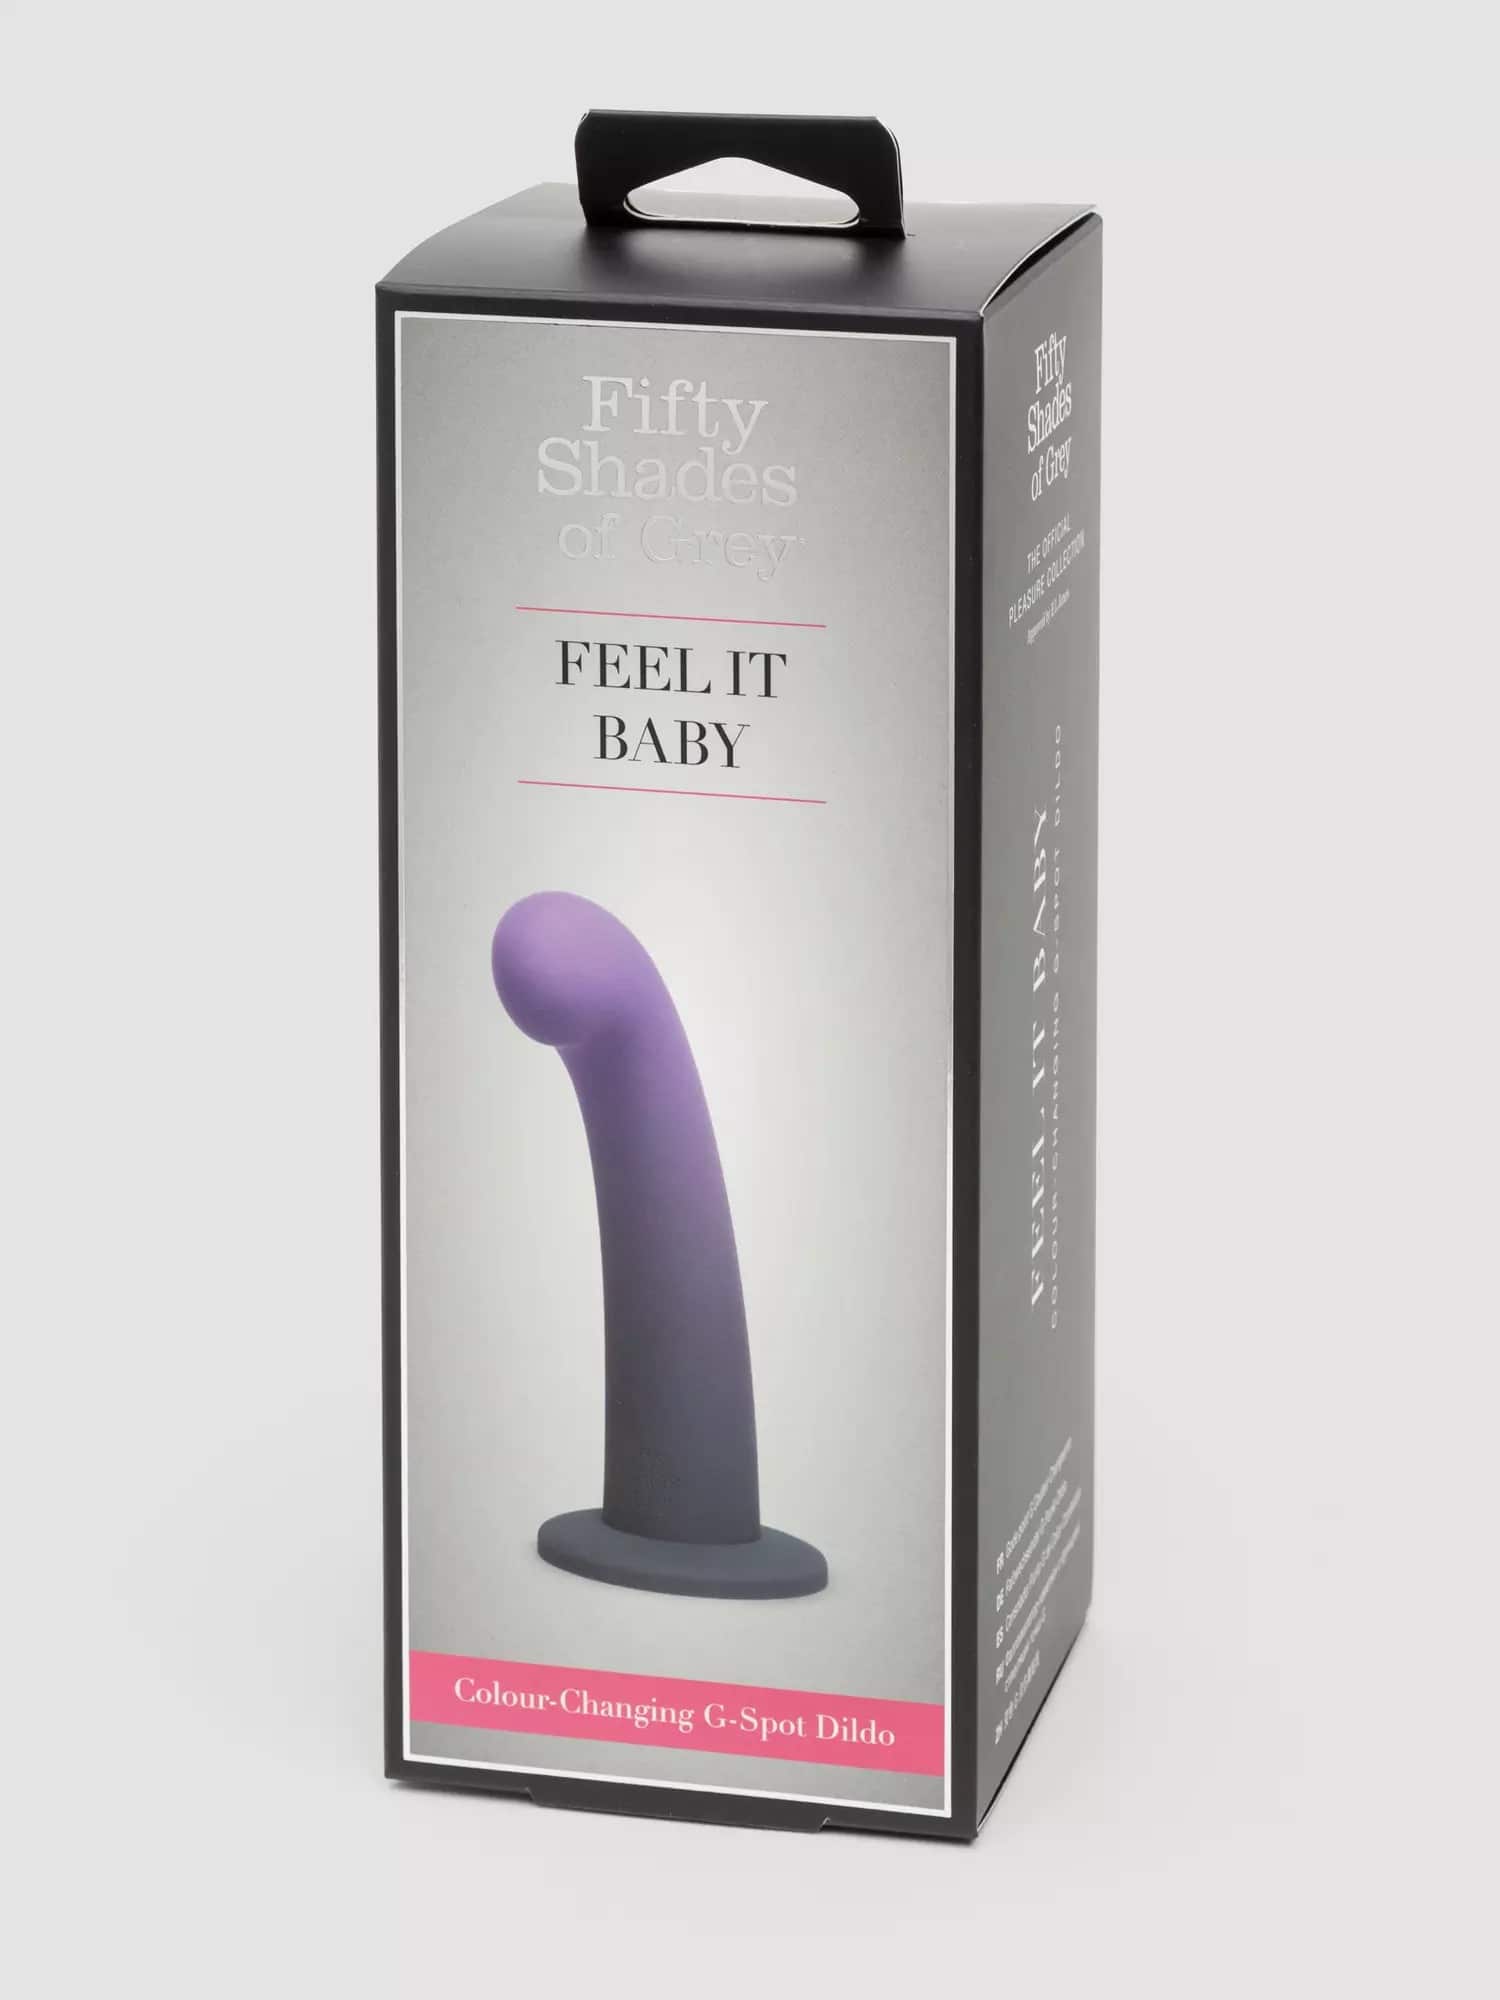 Fifty Shades of Grey Feel It Baby Color-Changing Dildo. Slide 3